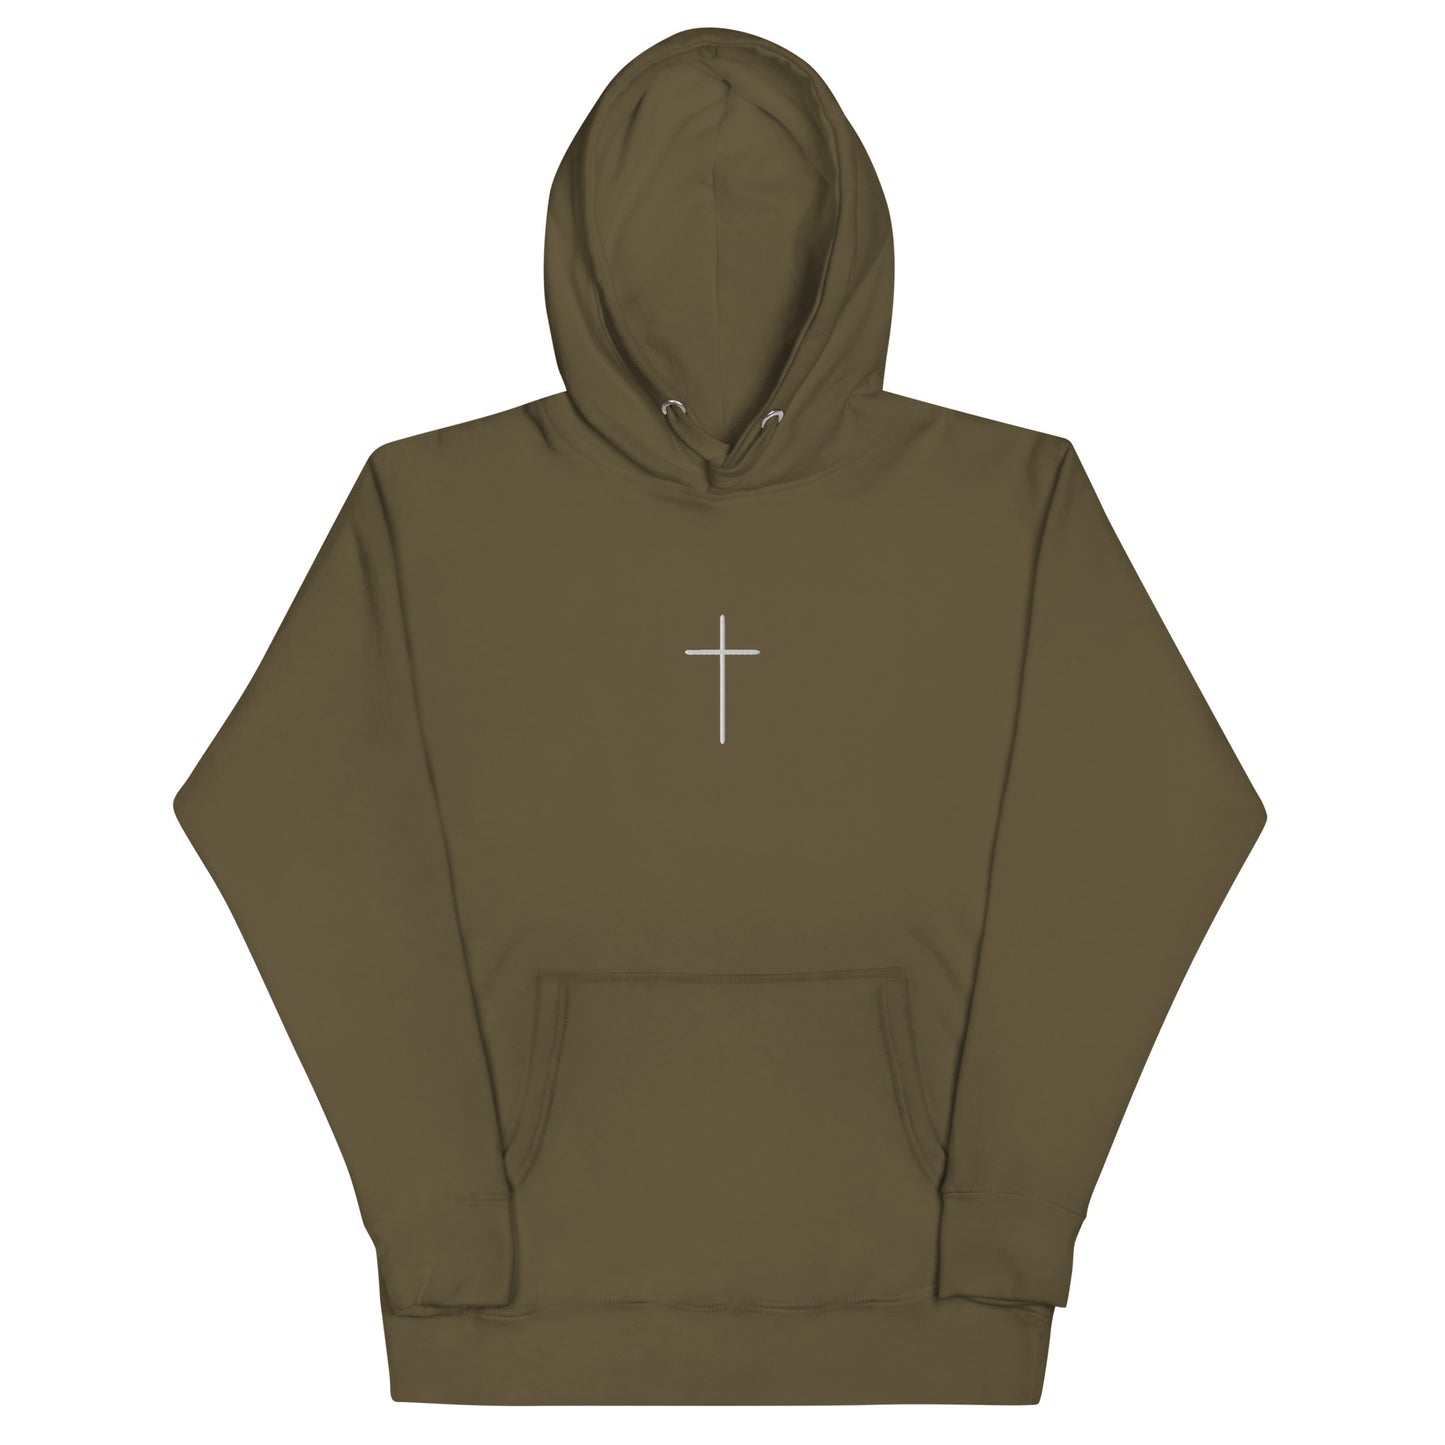 Embroidered Cross Hoodie